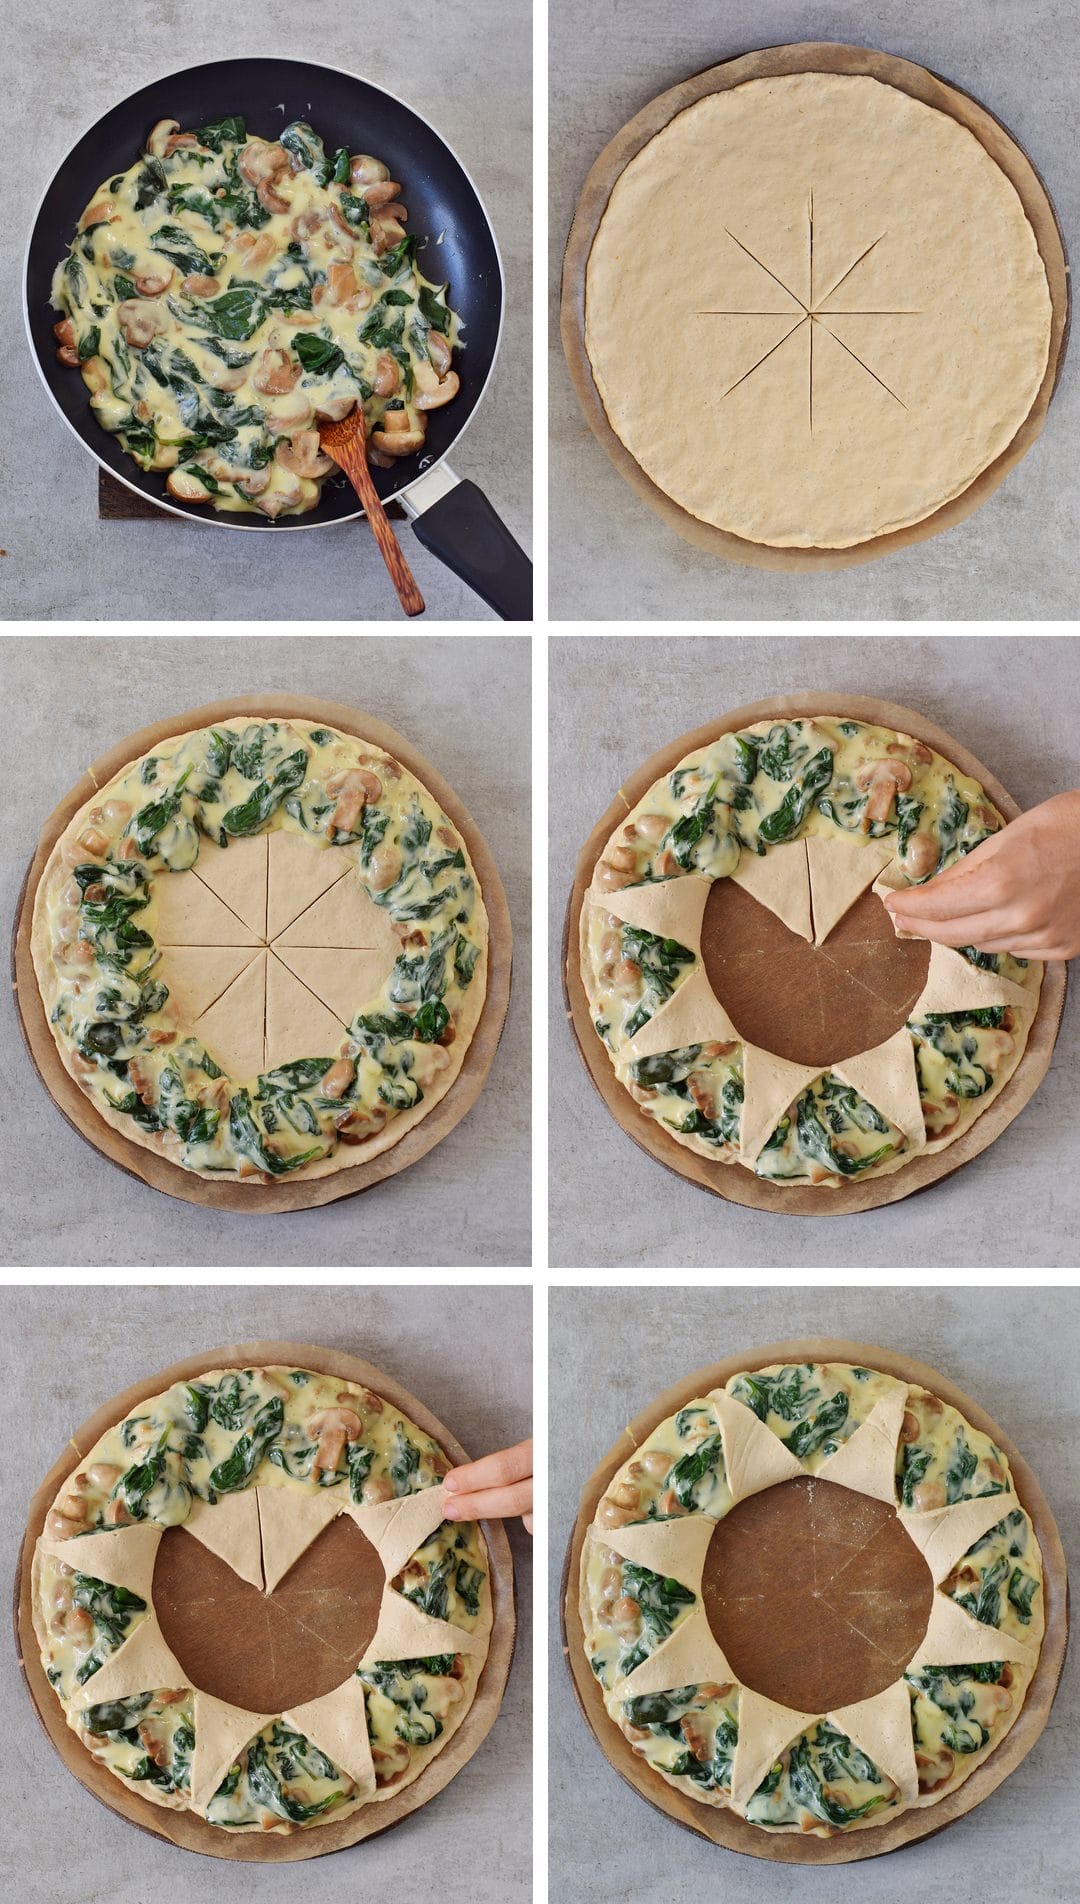 How to make a Crescent ring (corona) with spinach mushrooms and vegan cheese